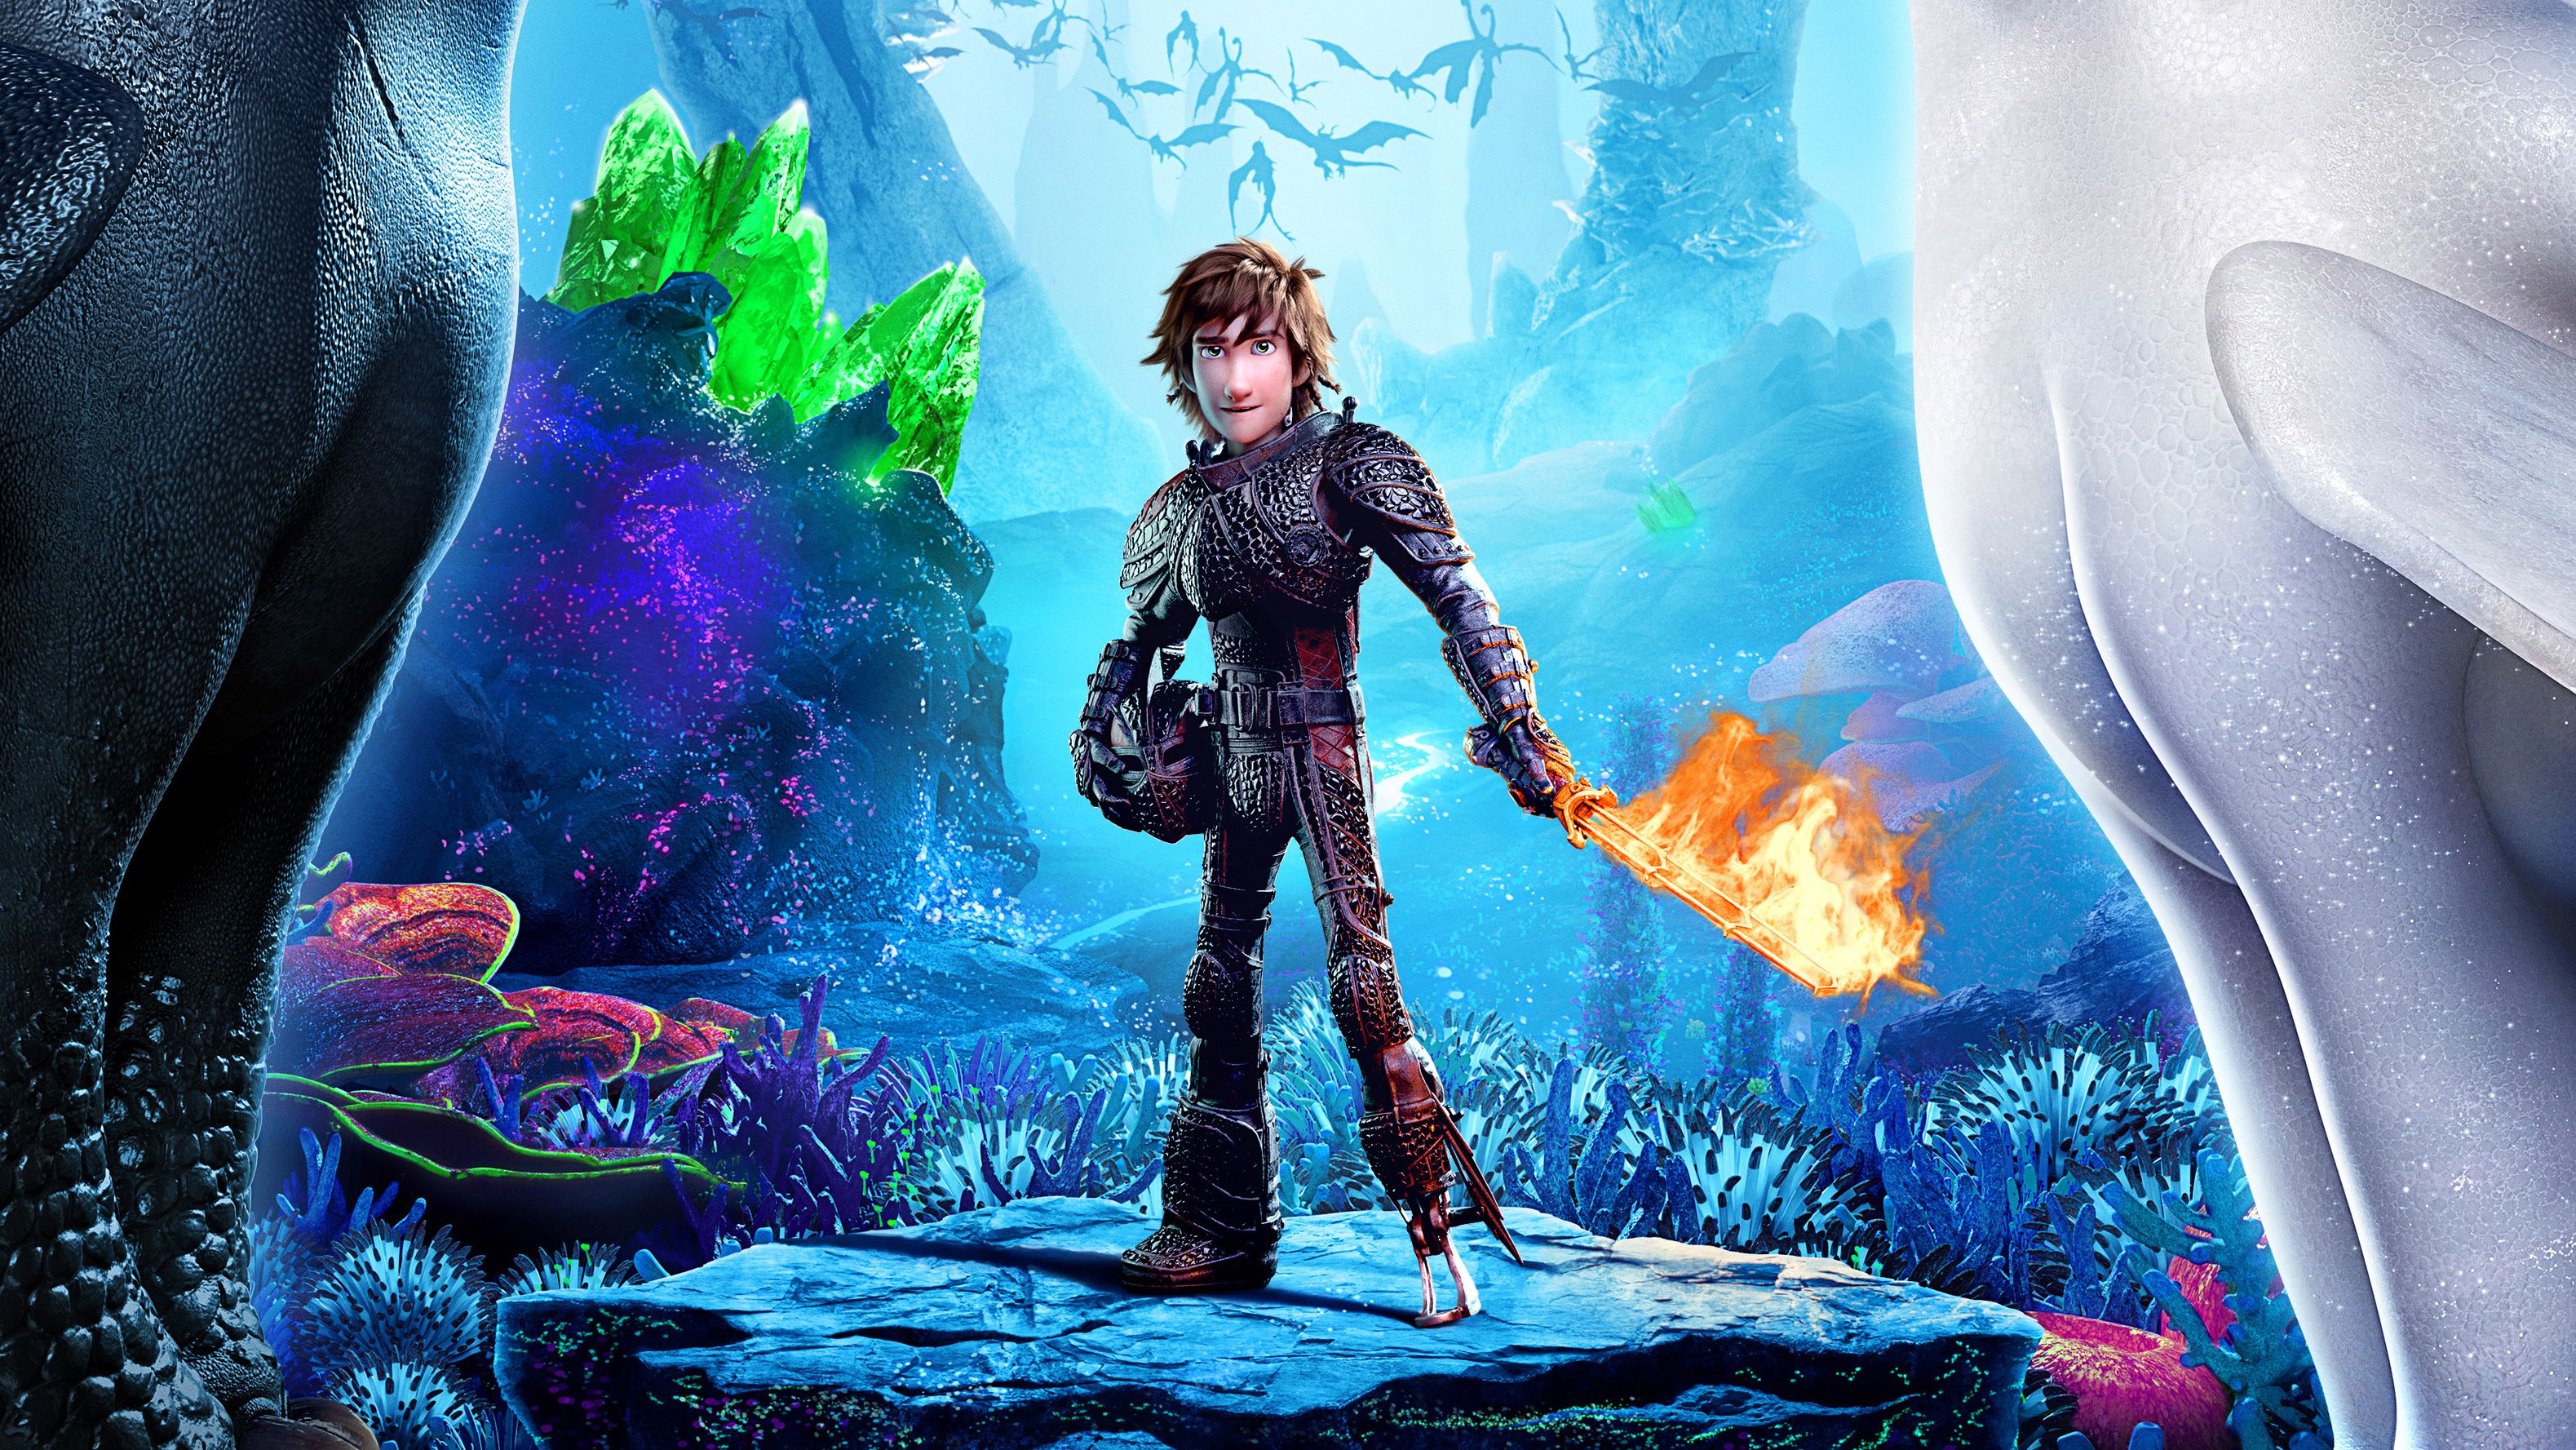 Hiccup Riding Toothless Wallpaper for iPhone 12 Pro